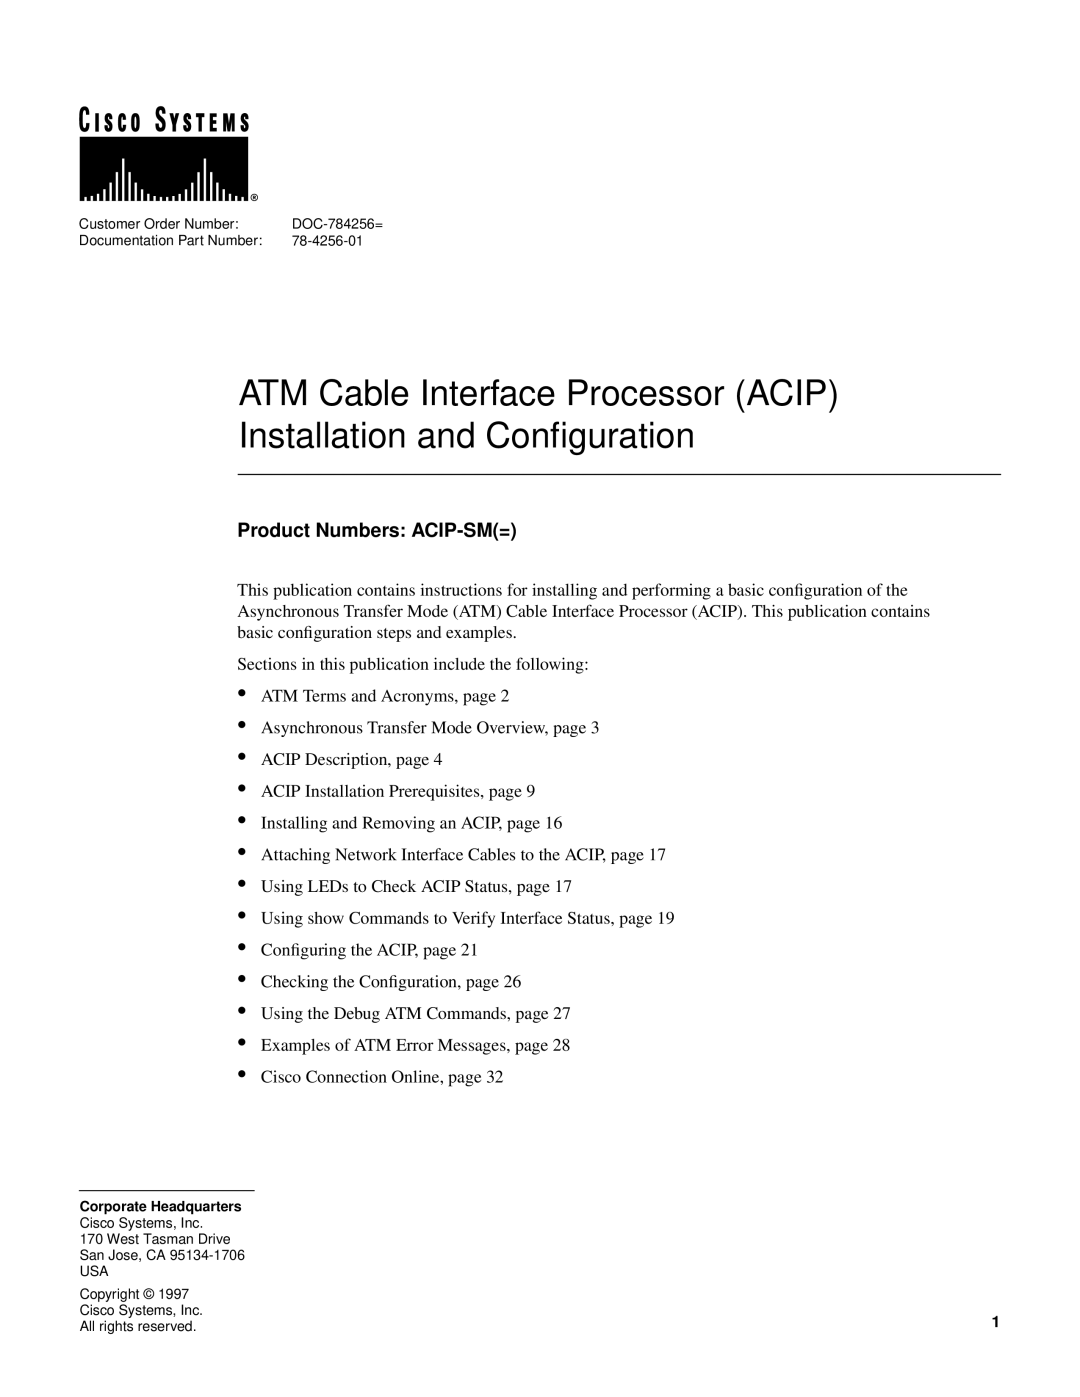 Cisco Systems ACIP-SM(=) manual ATM Cable Interface Processor ACIP Installation and Conﬁguration, Product Numbers ACIP-SM= 